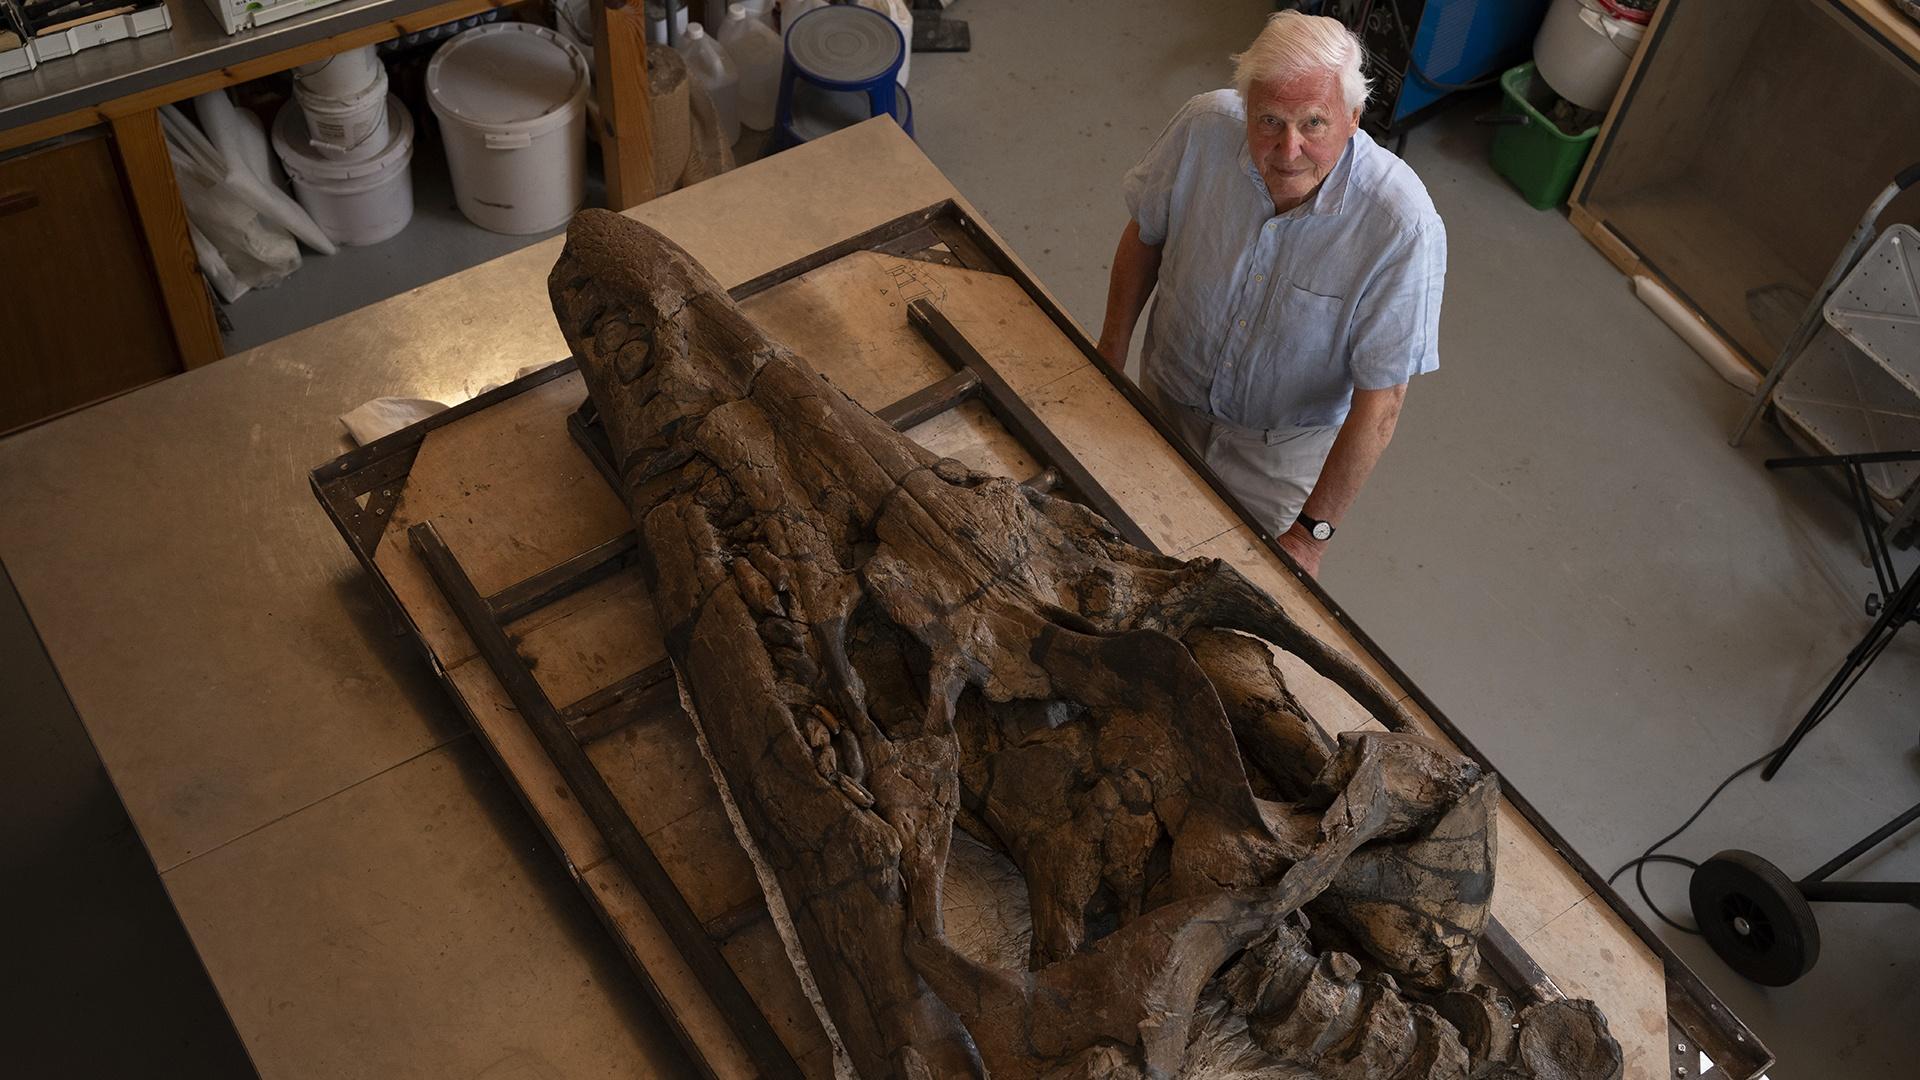 Sir David Attenborough standing next to the fossil of the largest Jurassic predator.